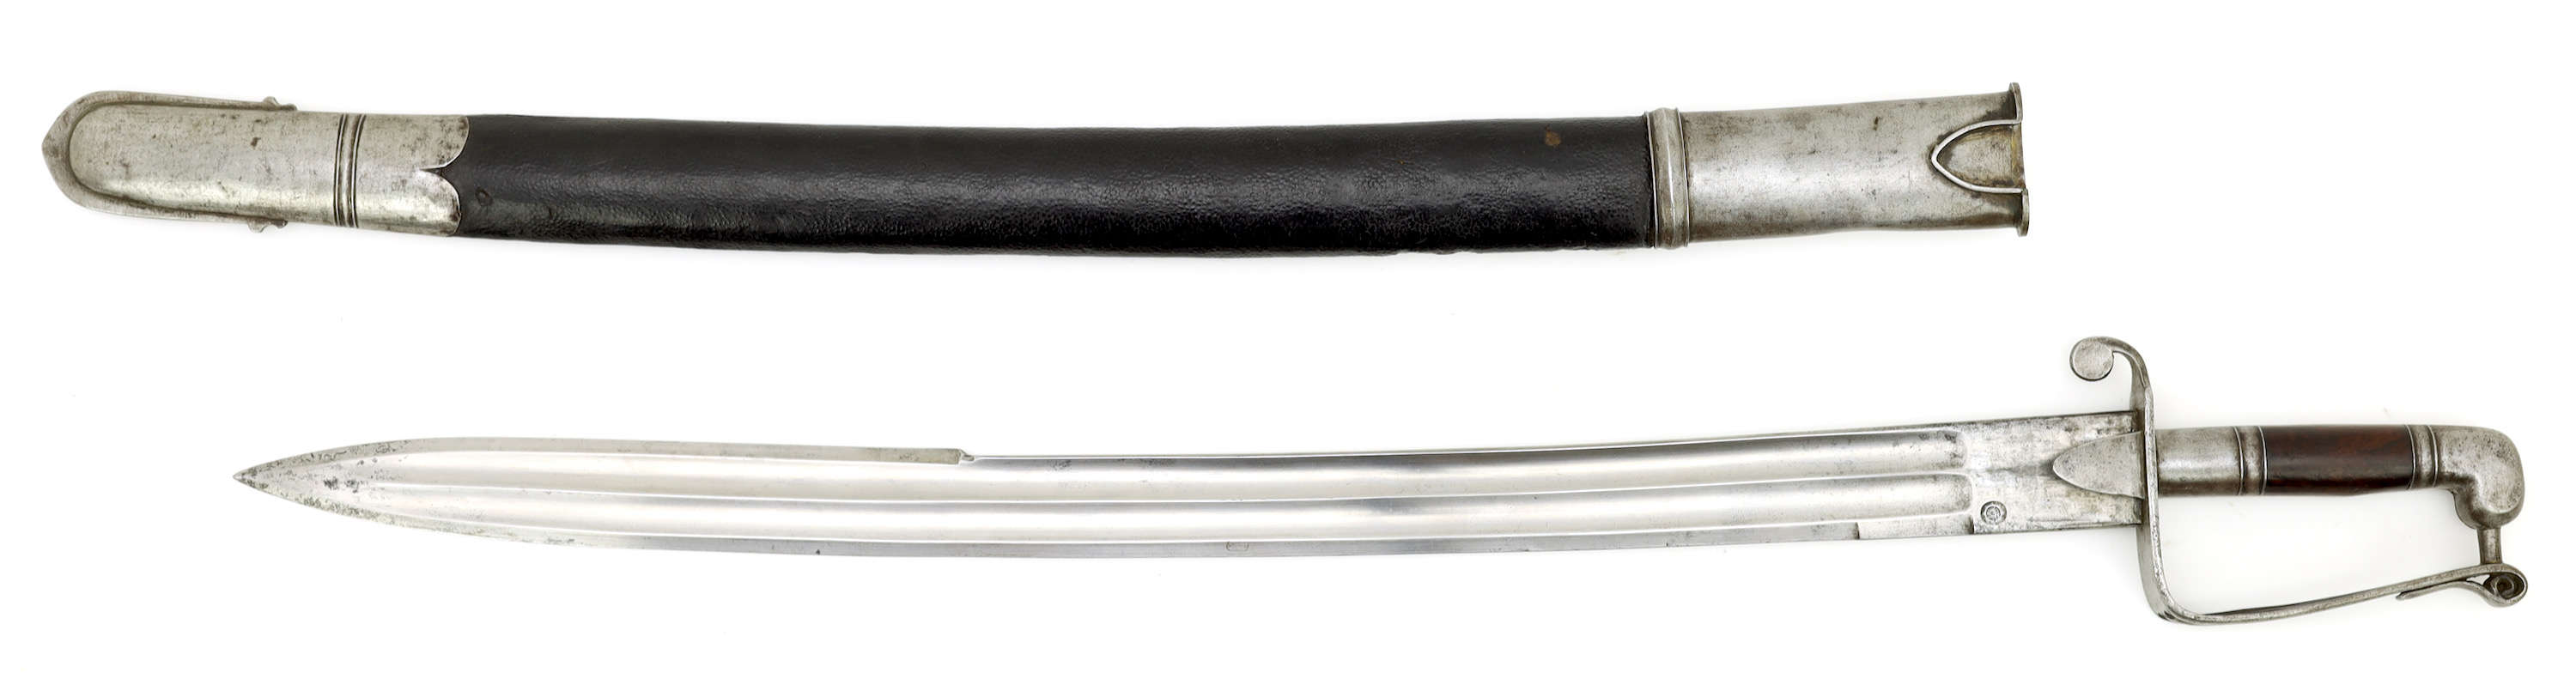 Afghan military saber dated 1908-1909